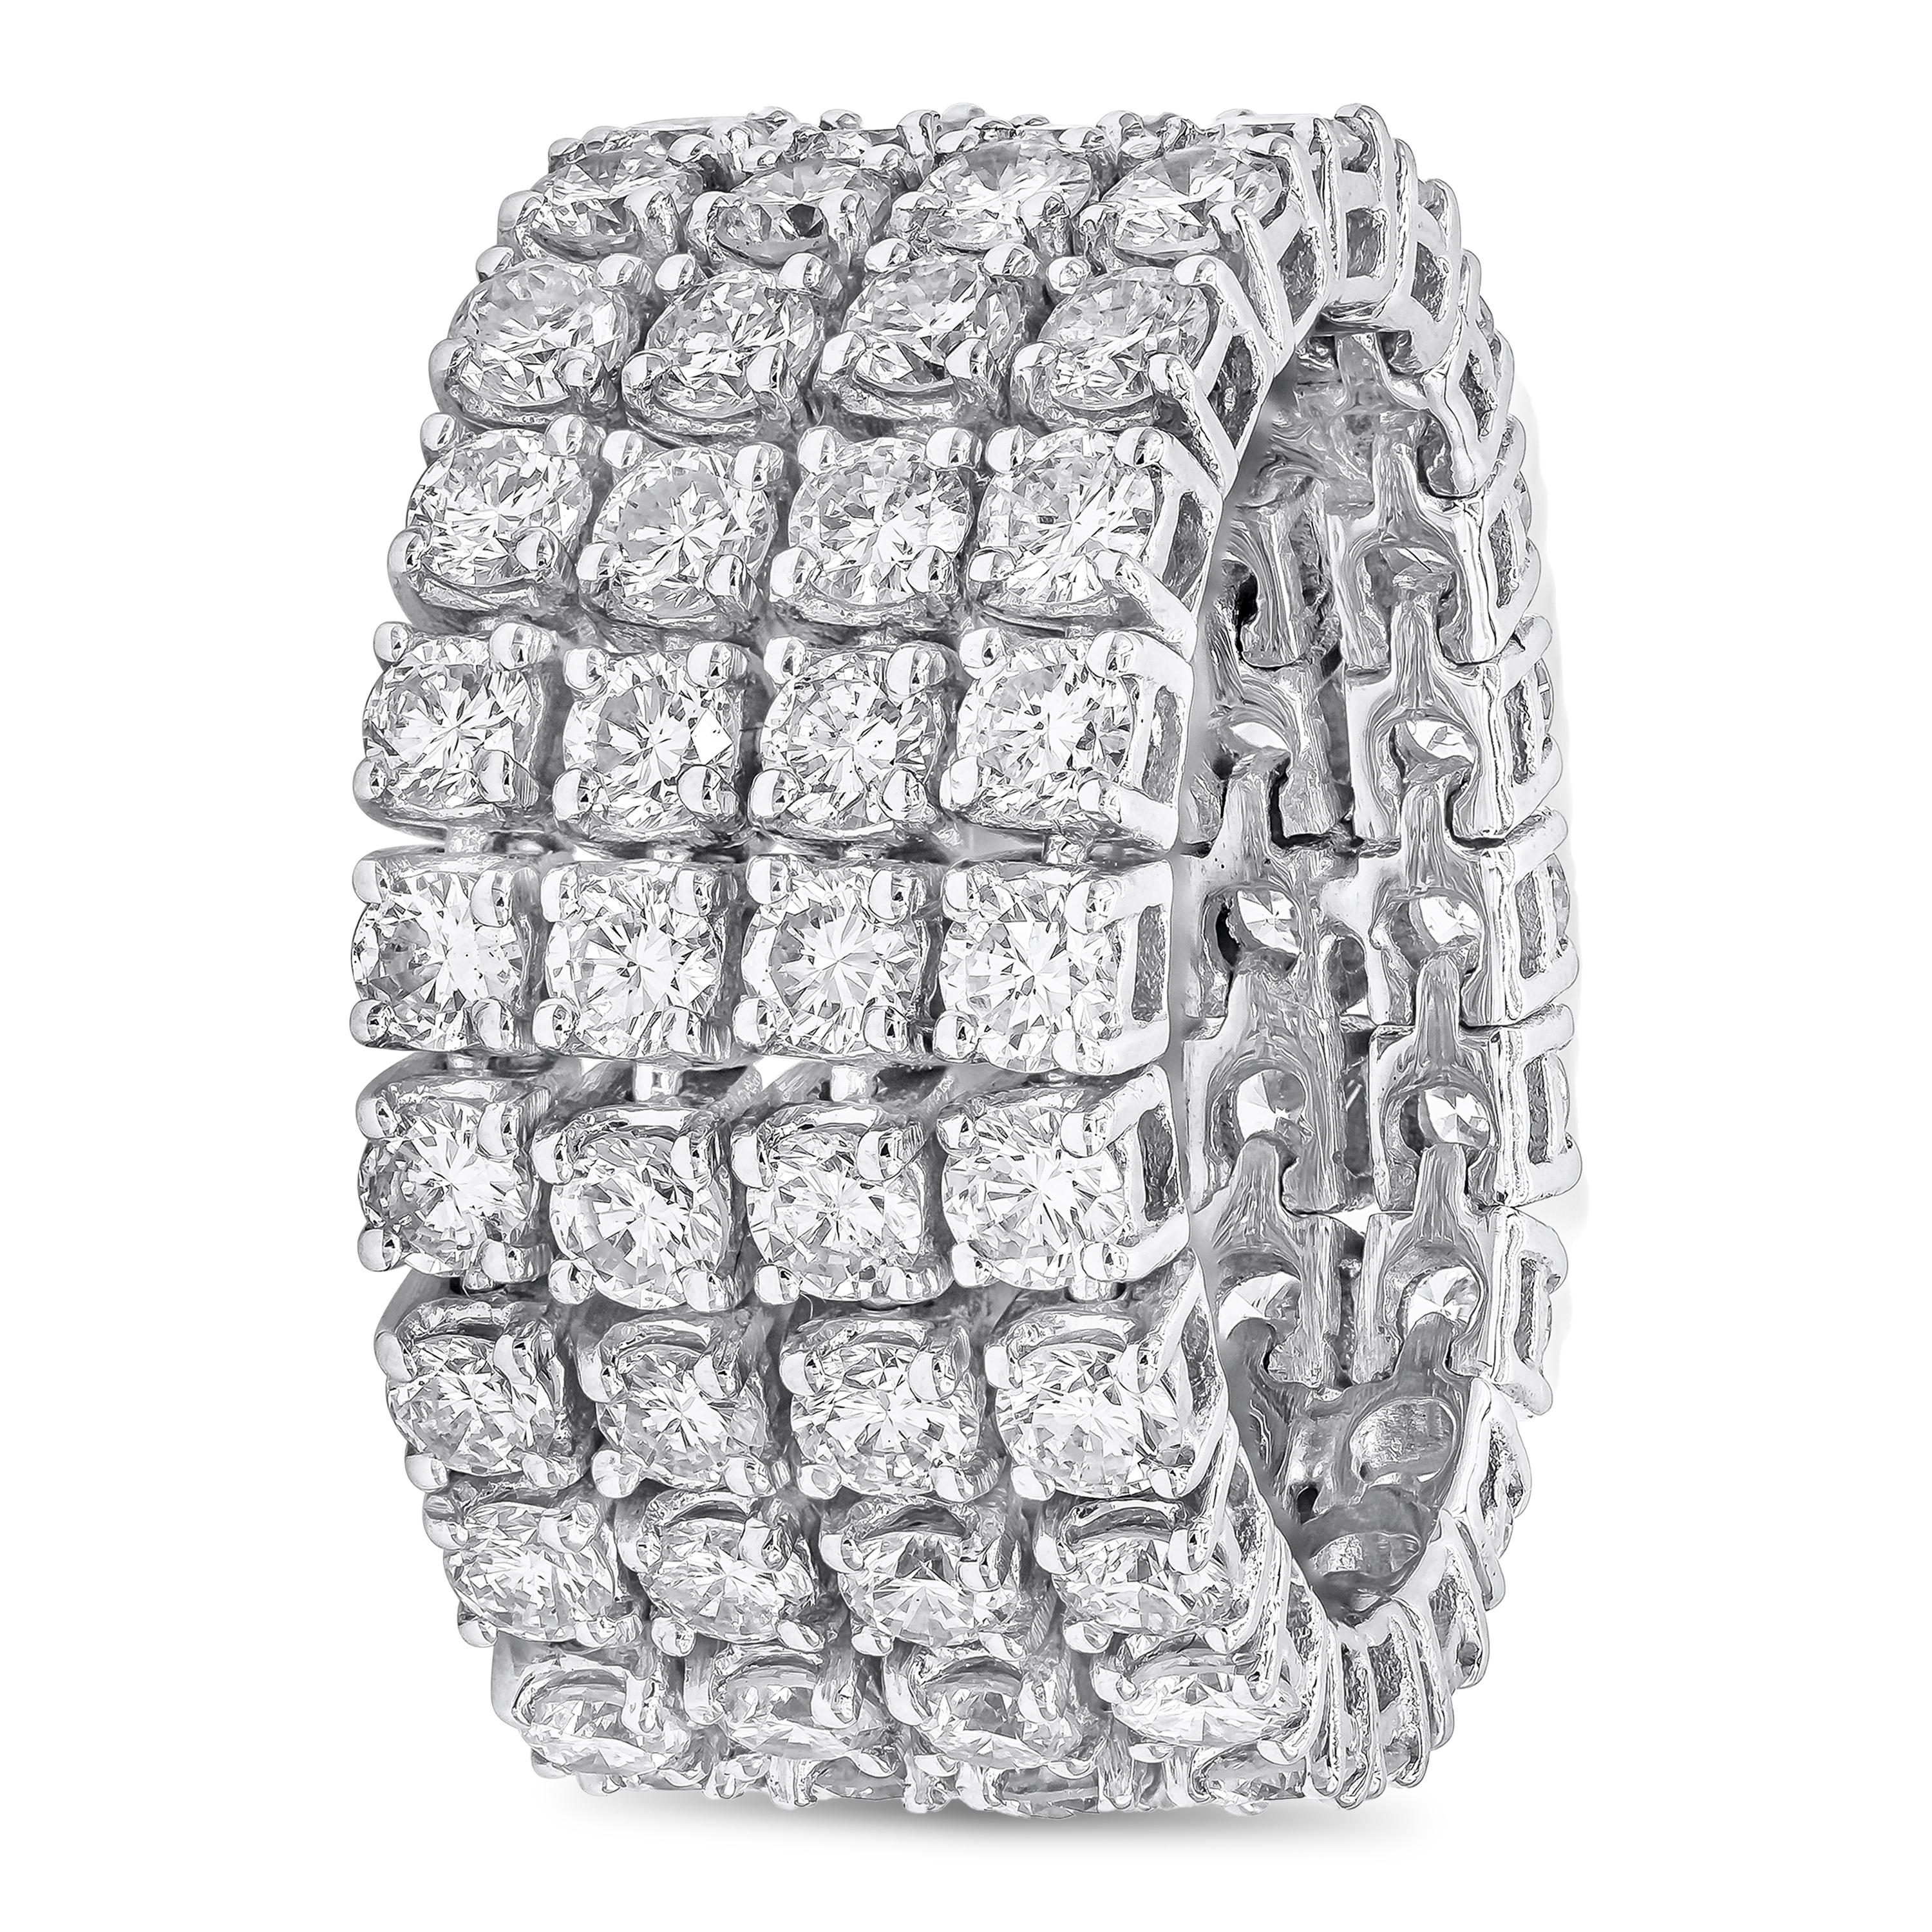 This fashionable and vibrant flexible wedding band showcases four rows of 84 brilliant round diamonds weighing 5.10 carats total, set in a classic four prong basket setting. Finely made in 18K white gold. Size 6.5 US resizable upon request and